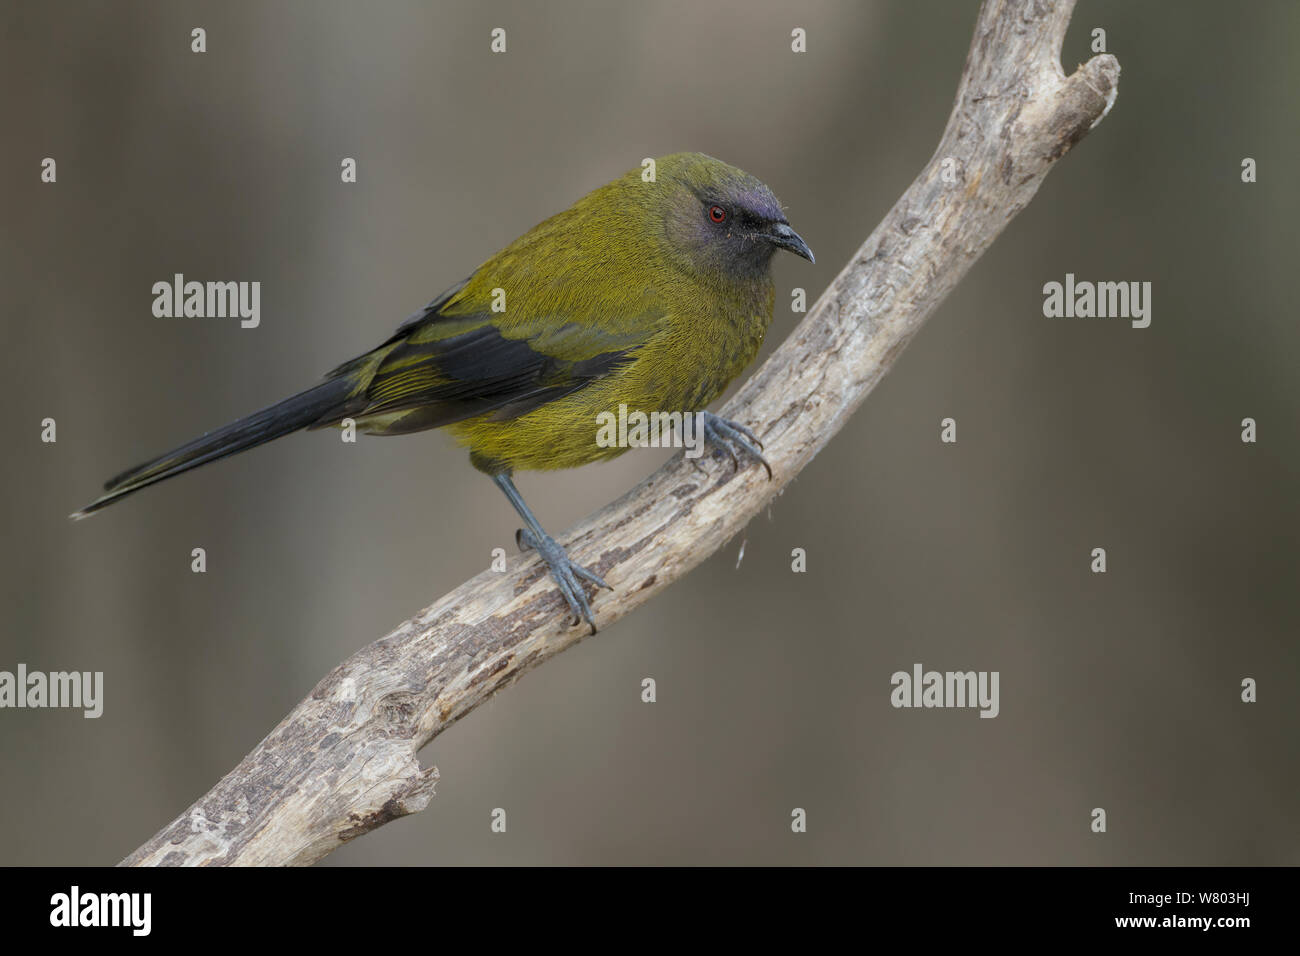 Adult New Zealand bellbird (Anthornis melanura) perched on a branch in the understorey. Orokonui Ecosanctuary, Otago Peninsula, South Island New Zealand. January.  Endemic Species. Stock Photo